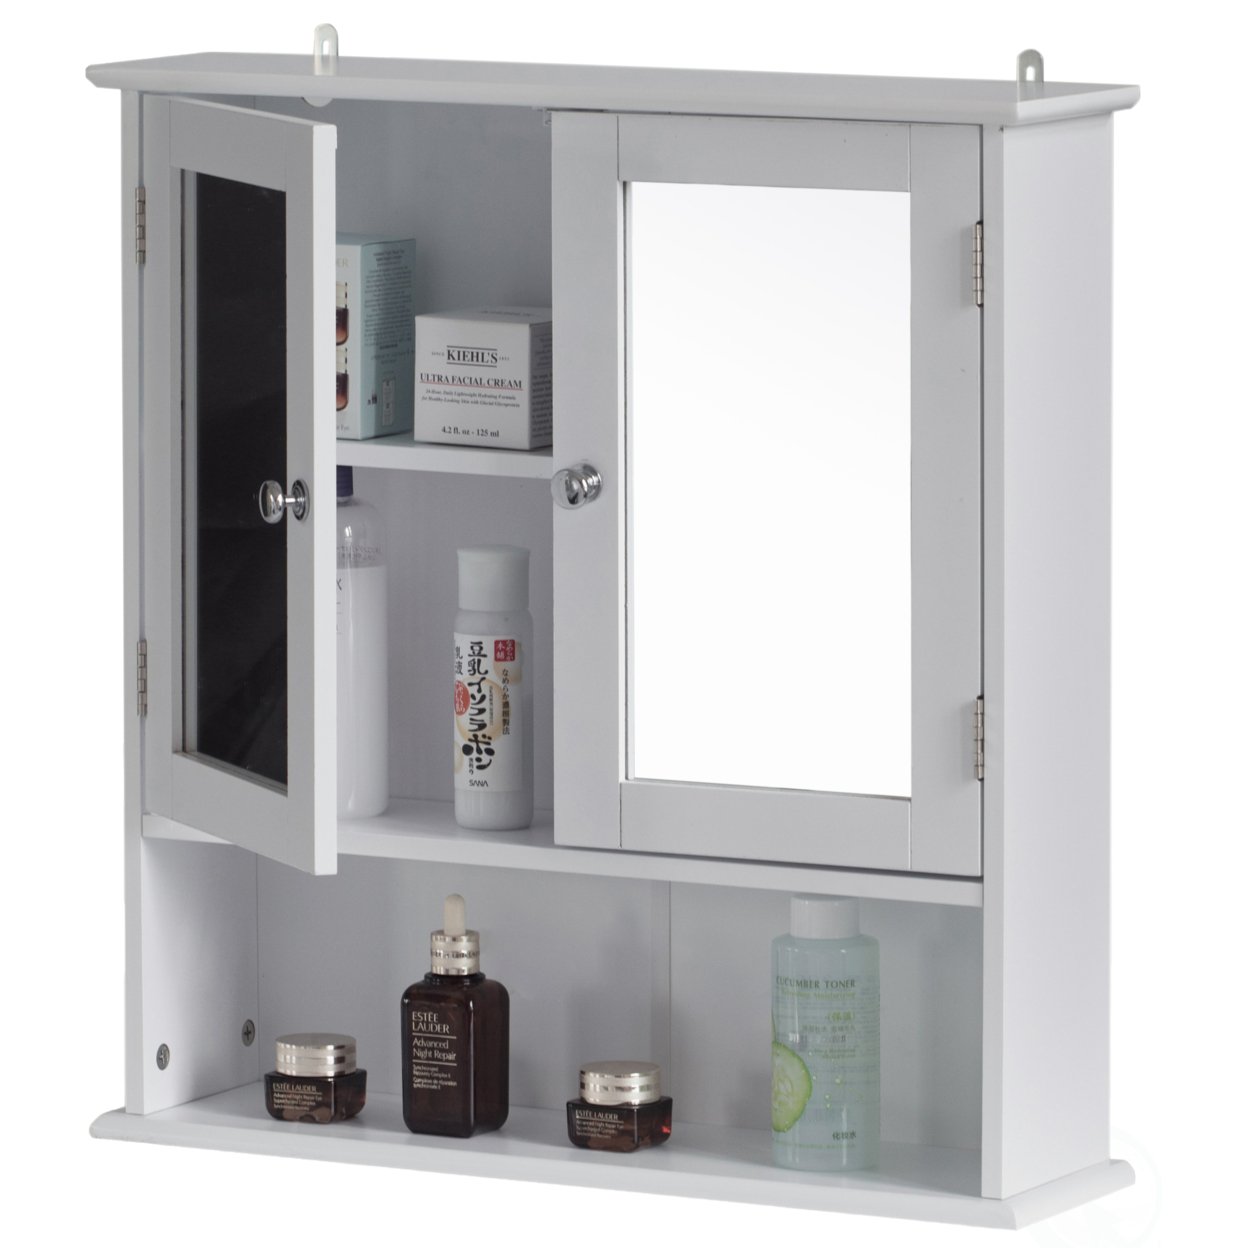 Mirror Wall Mounted Cabinet For The Bathroom And Vanity With Adjustable Shelves - Black